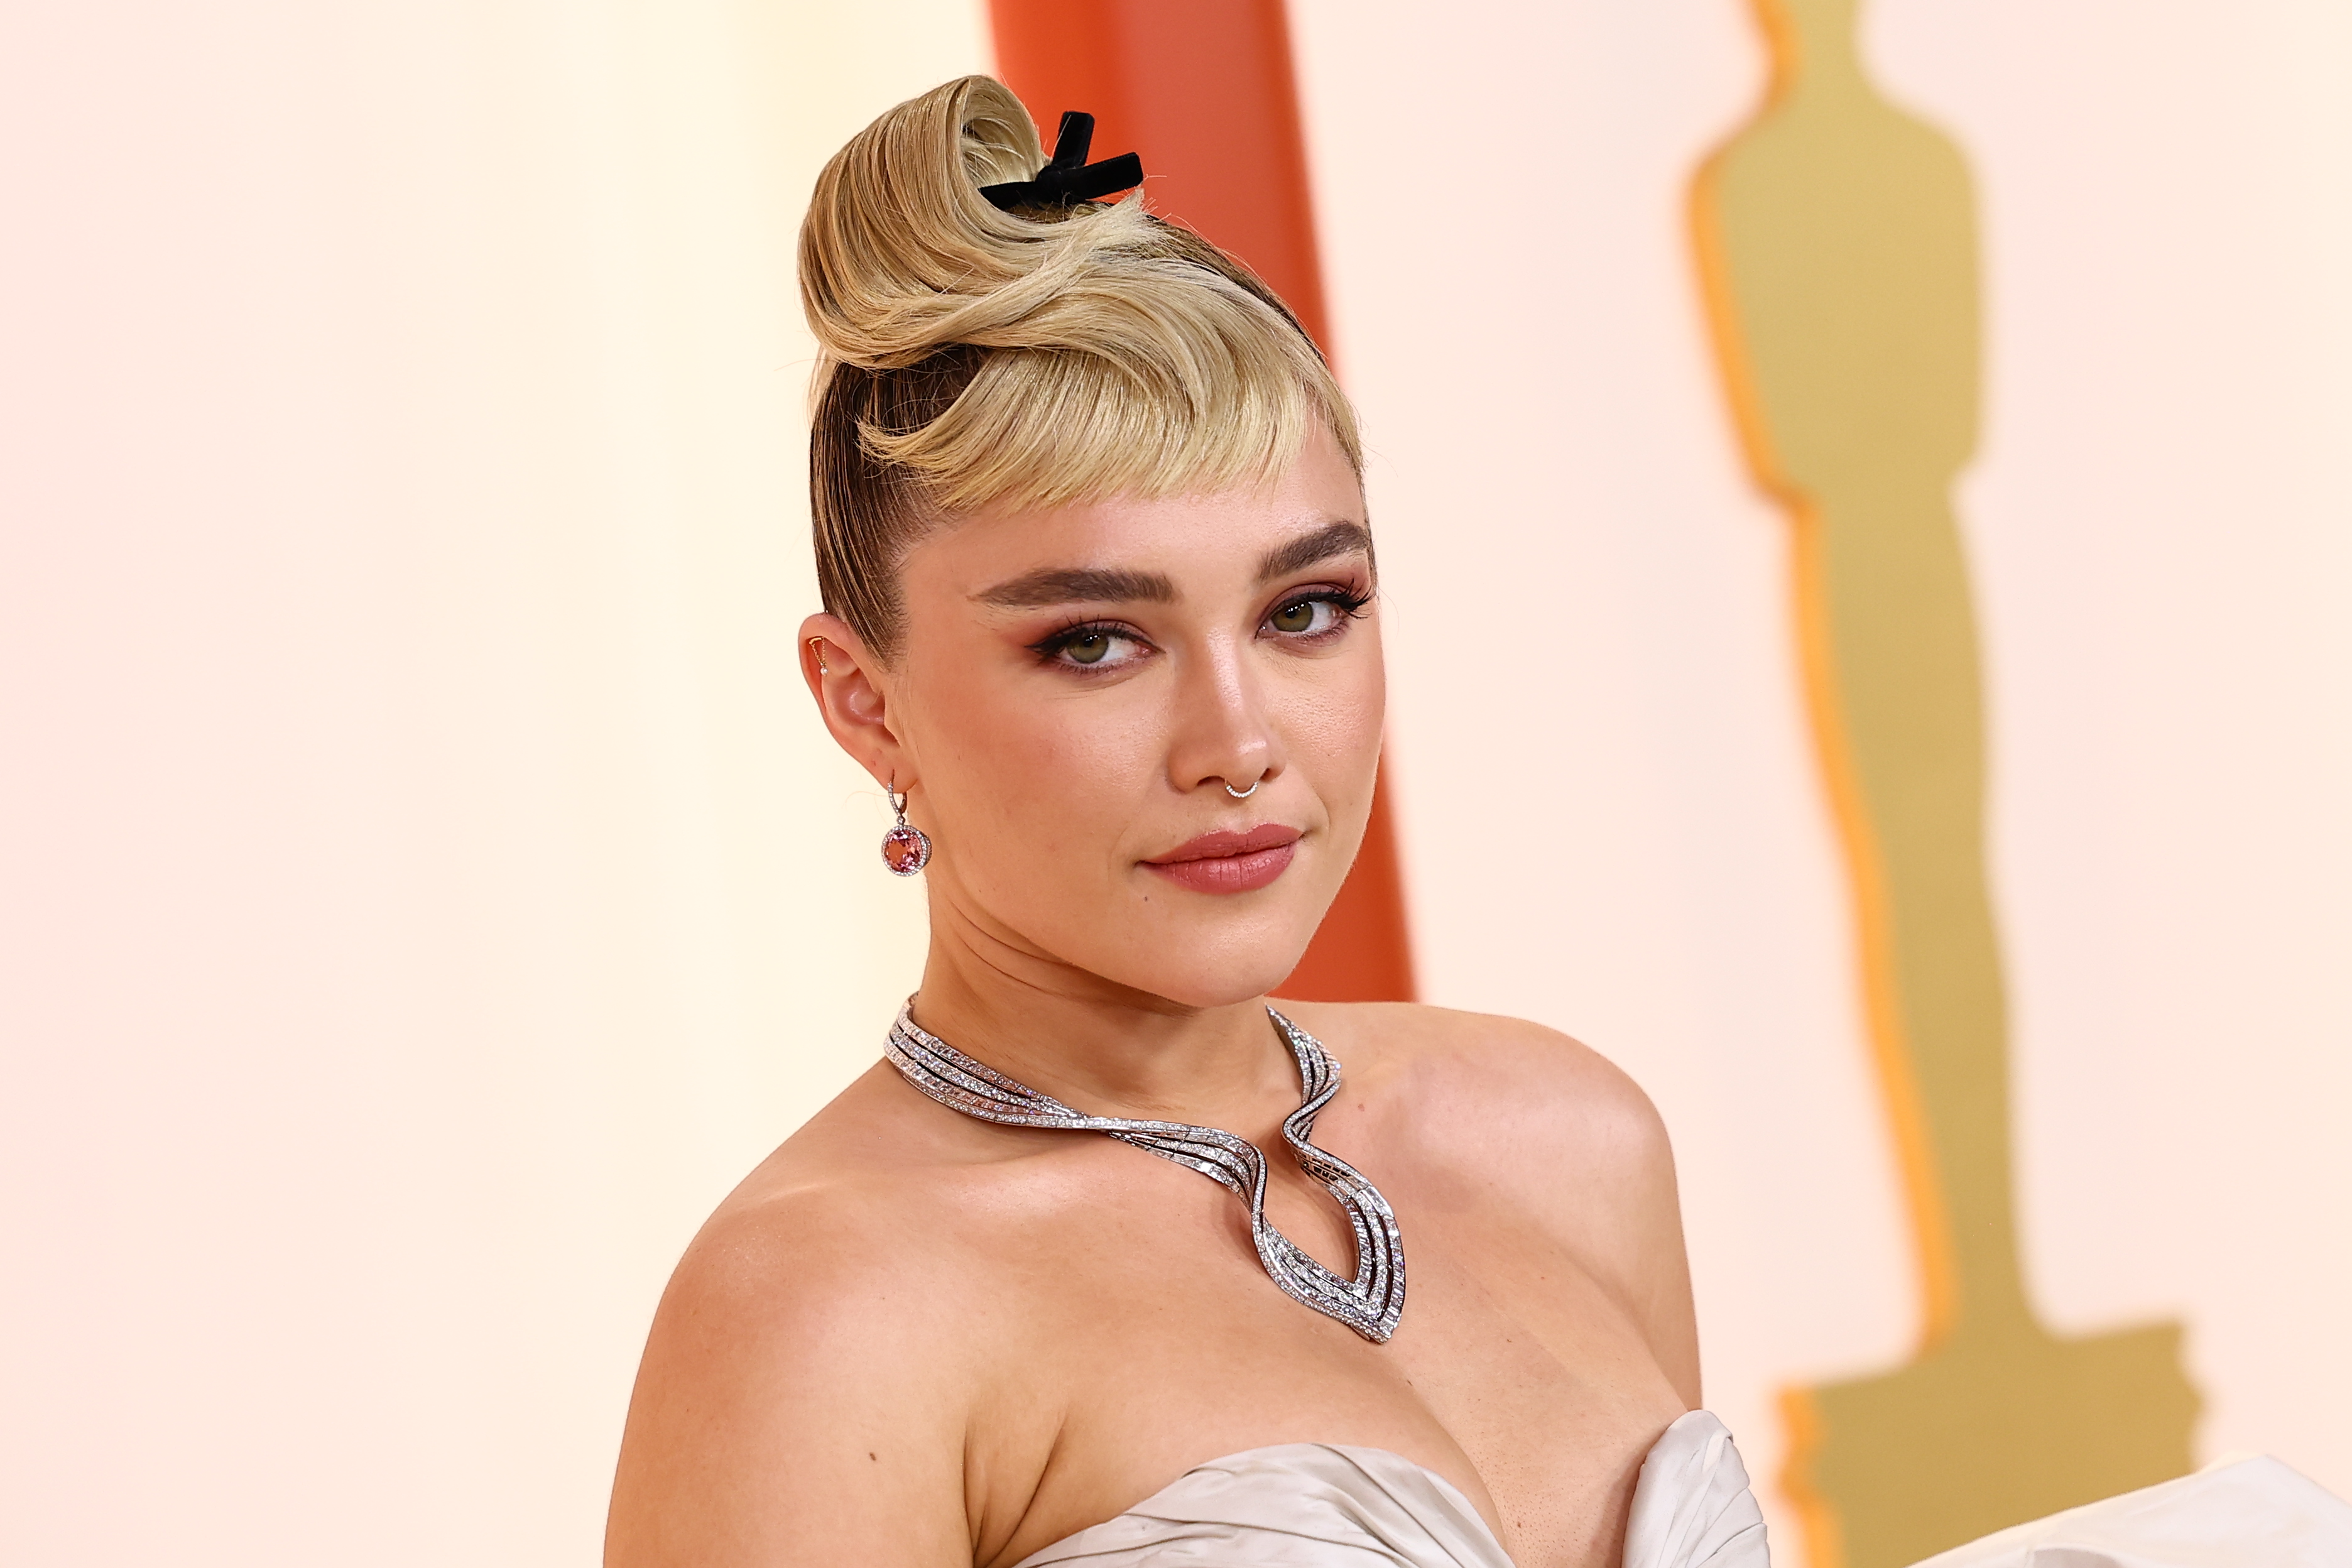 Florence Pugh attends the 95th Annual Academy Awards on March 12, 2023, in Hollywood, California. | Source: Getty Images